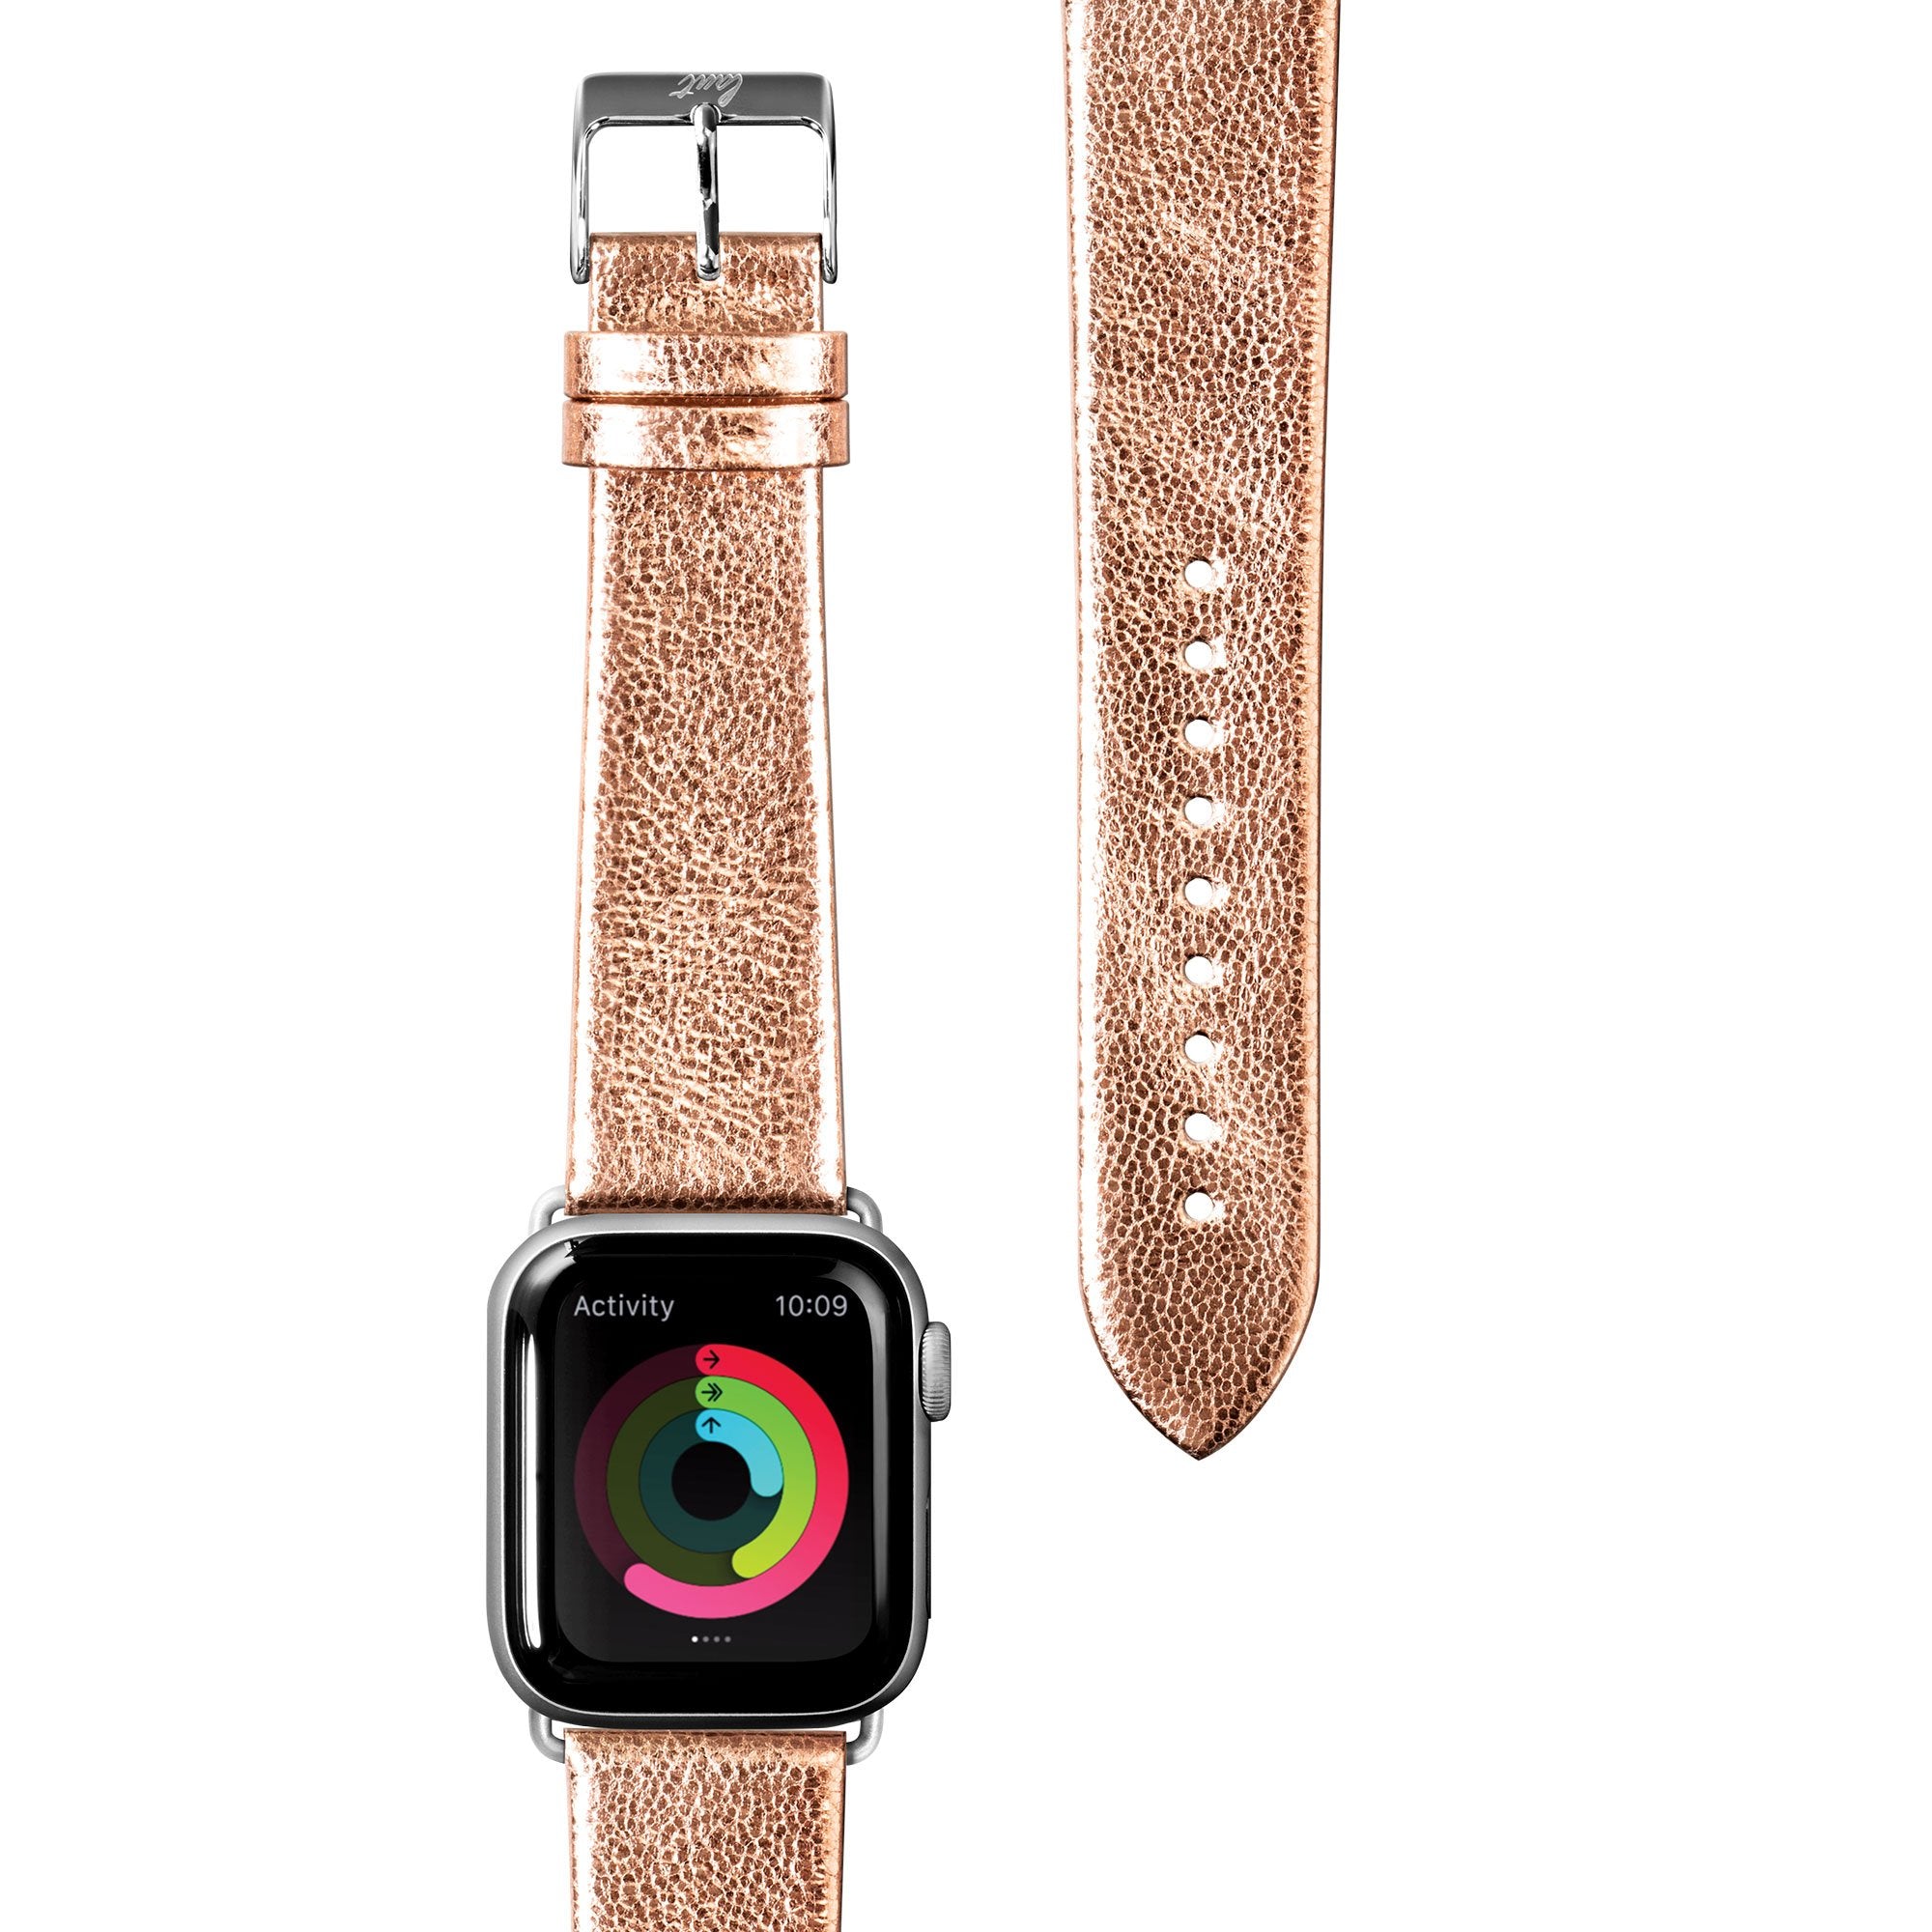 METALLIC Leather Watch Strap for Apple Watch Series 1/2/3/4/5 - LAUT Japan